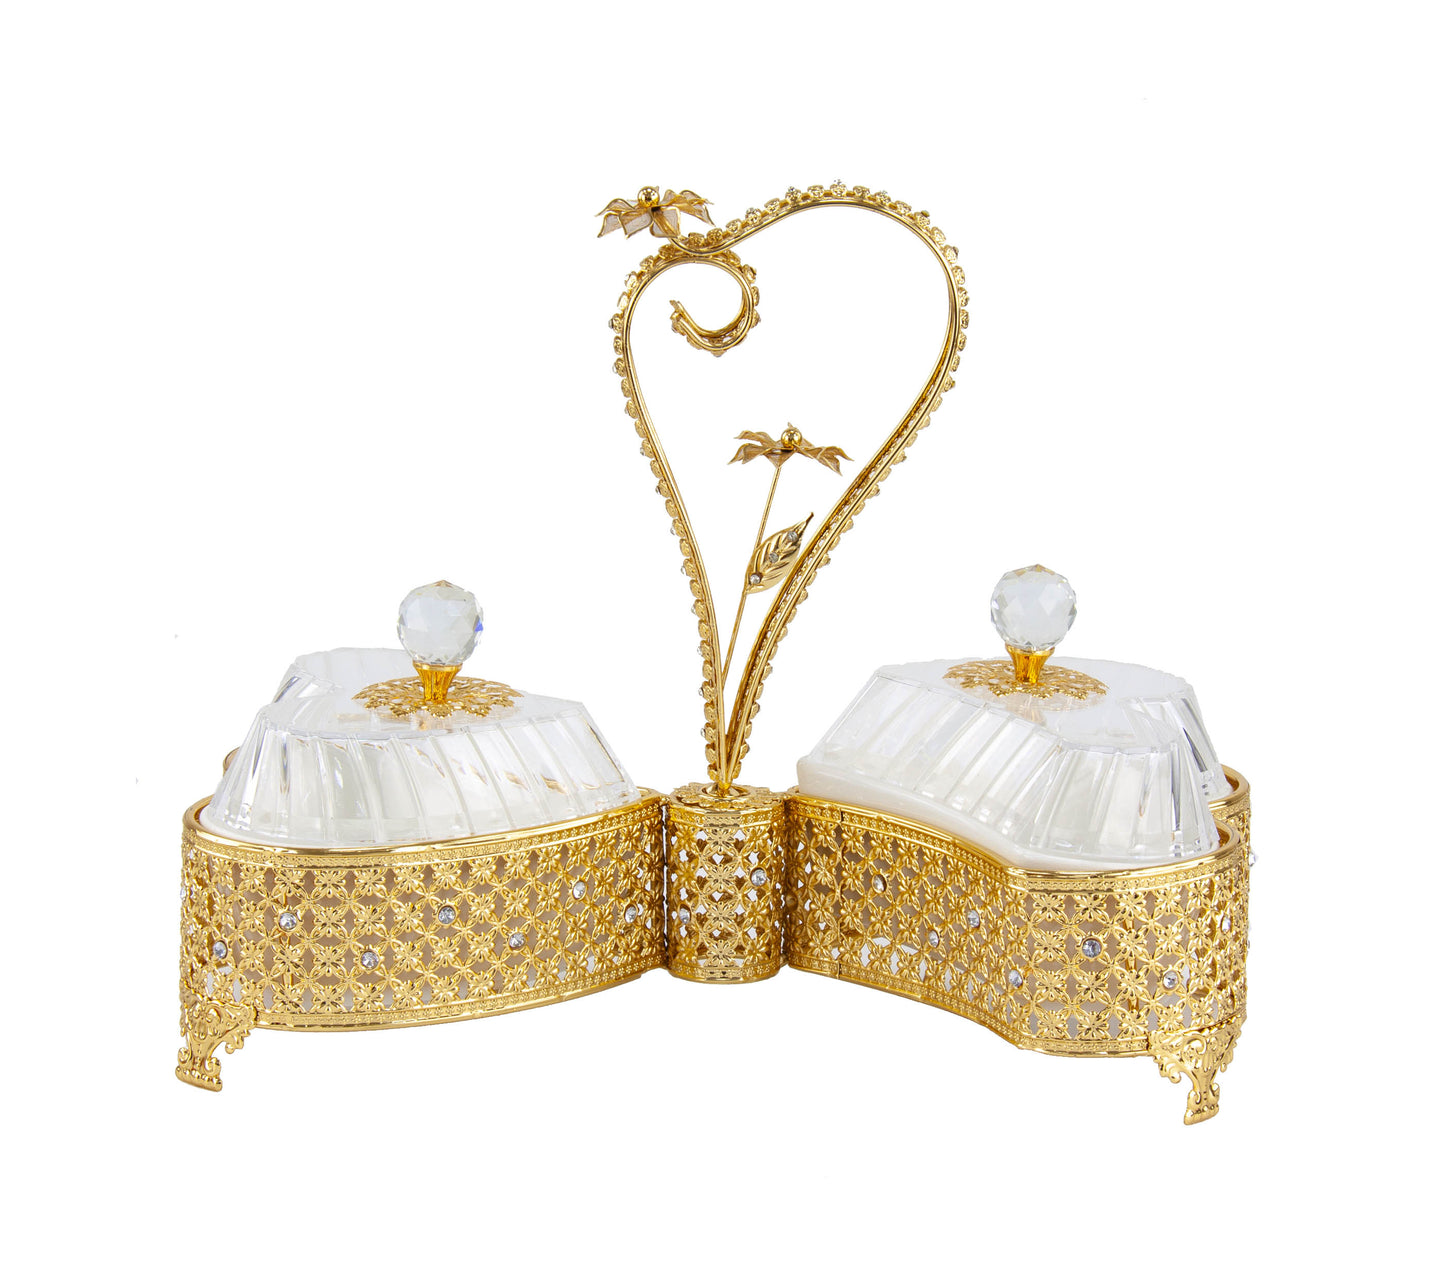 Ornate Party Heart Shape Serving Tray 2 Bowls With Lids Gold Embroidery 36cm x 19cm x 32cm 8440 (Big Parcel Rate)